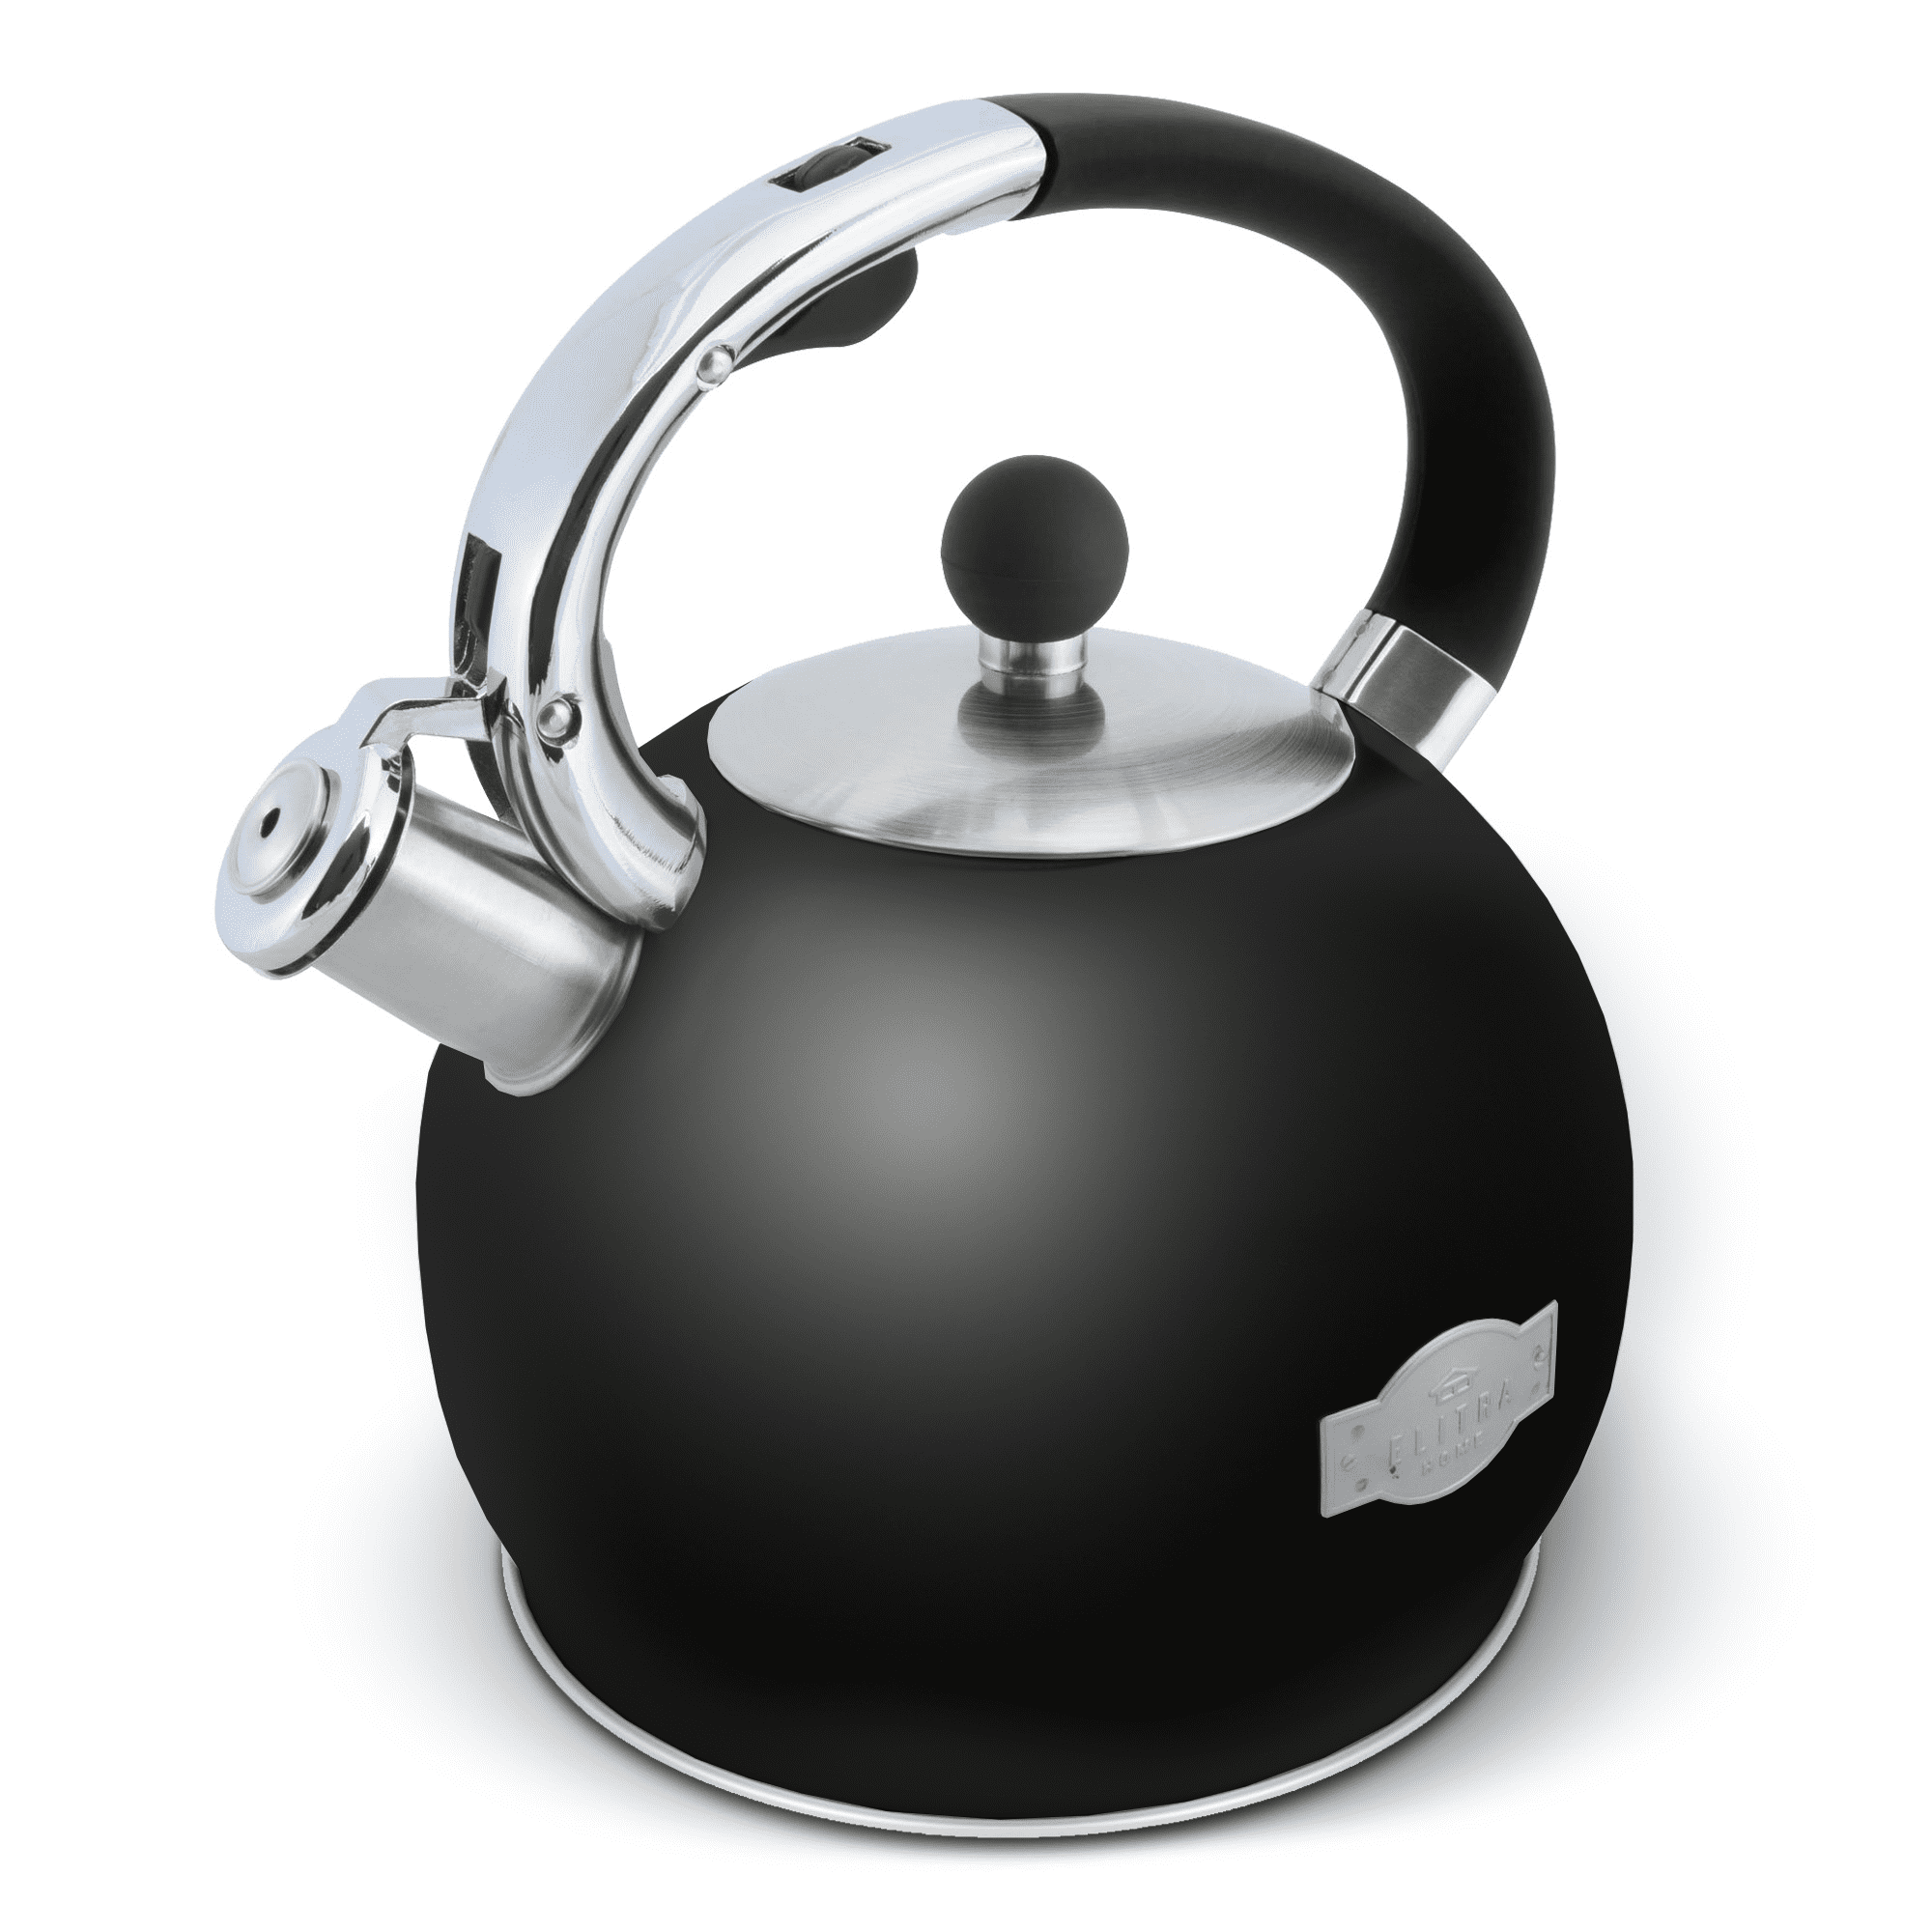 ChefElect 2 1/2 Quart Stainless Steel Whistling Kettle